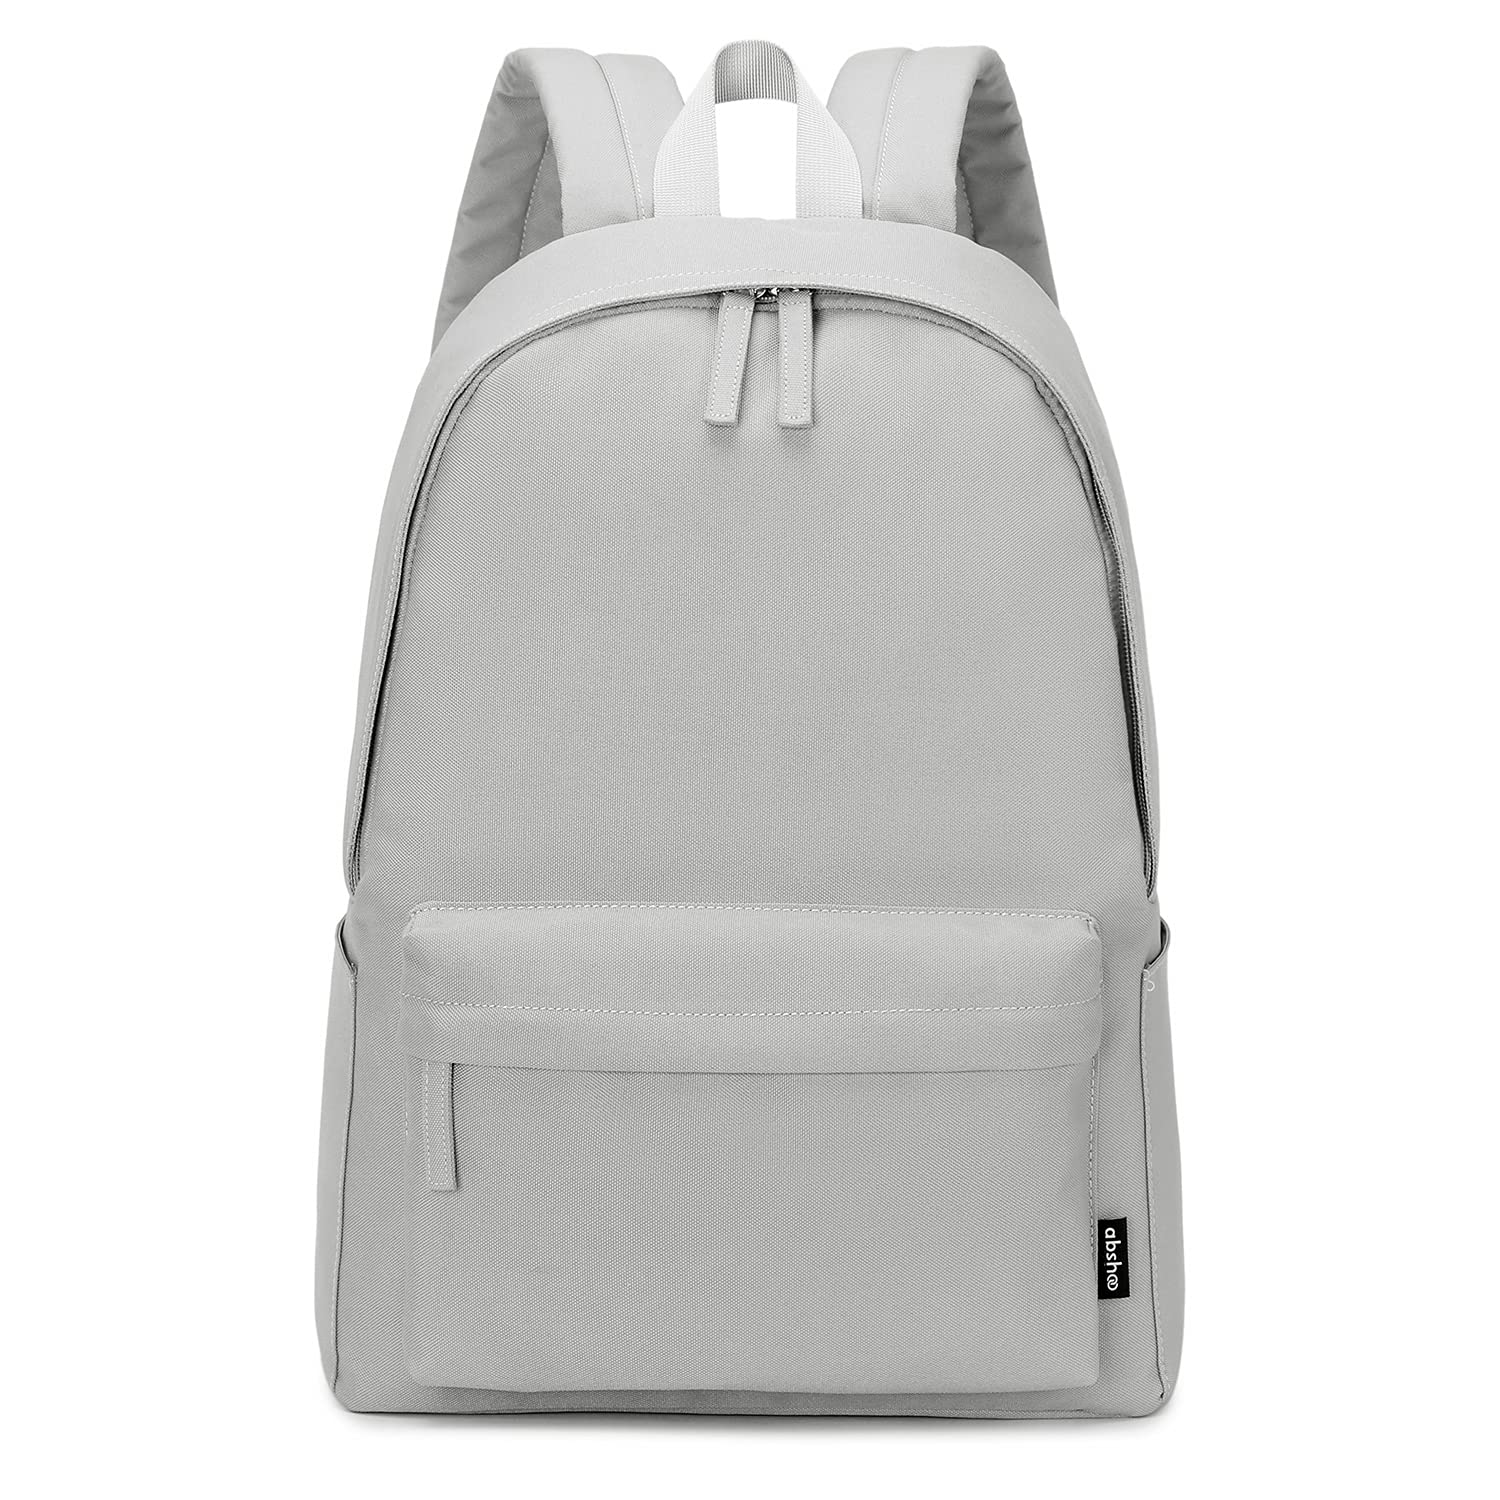 abshoo Lightweight Casual Unisex Backpack for School Solid Color Boobags (Light Grey)